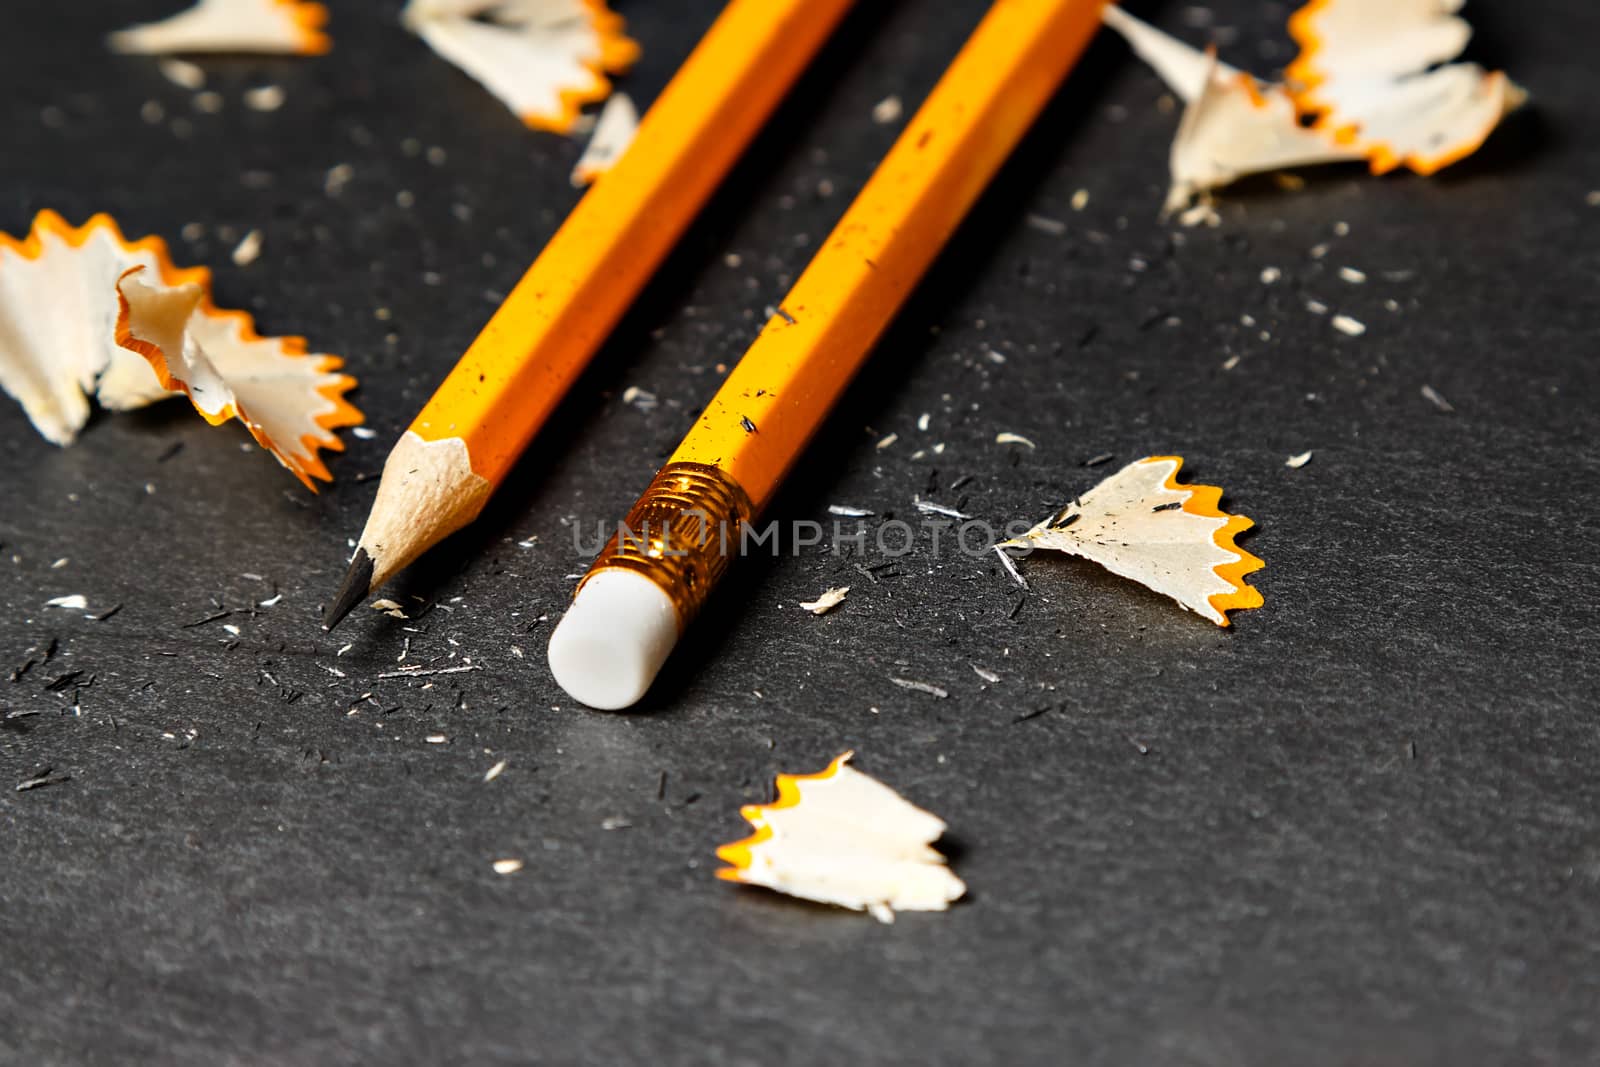 Two pencils with shavings on black background. Horizontal image.